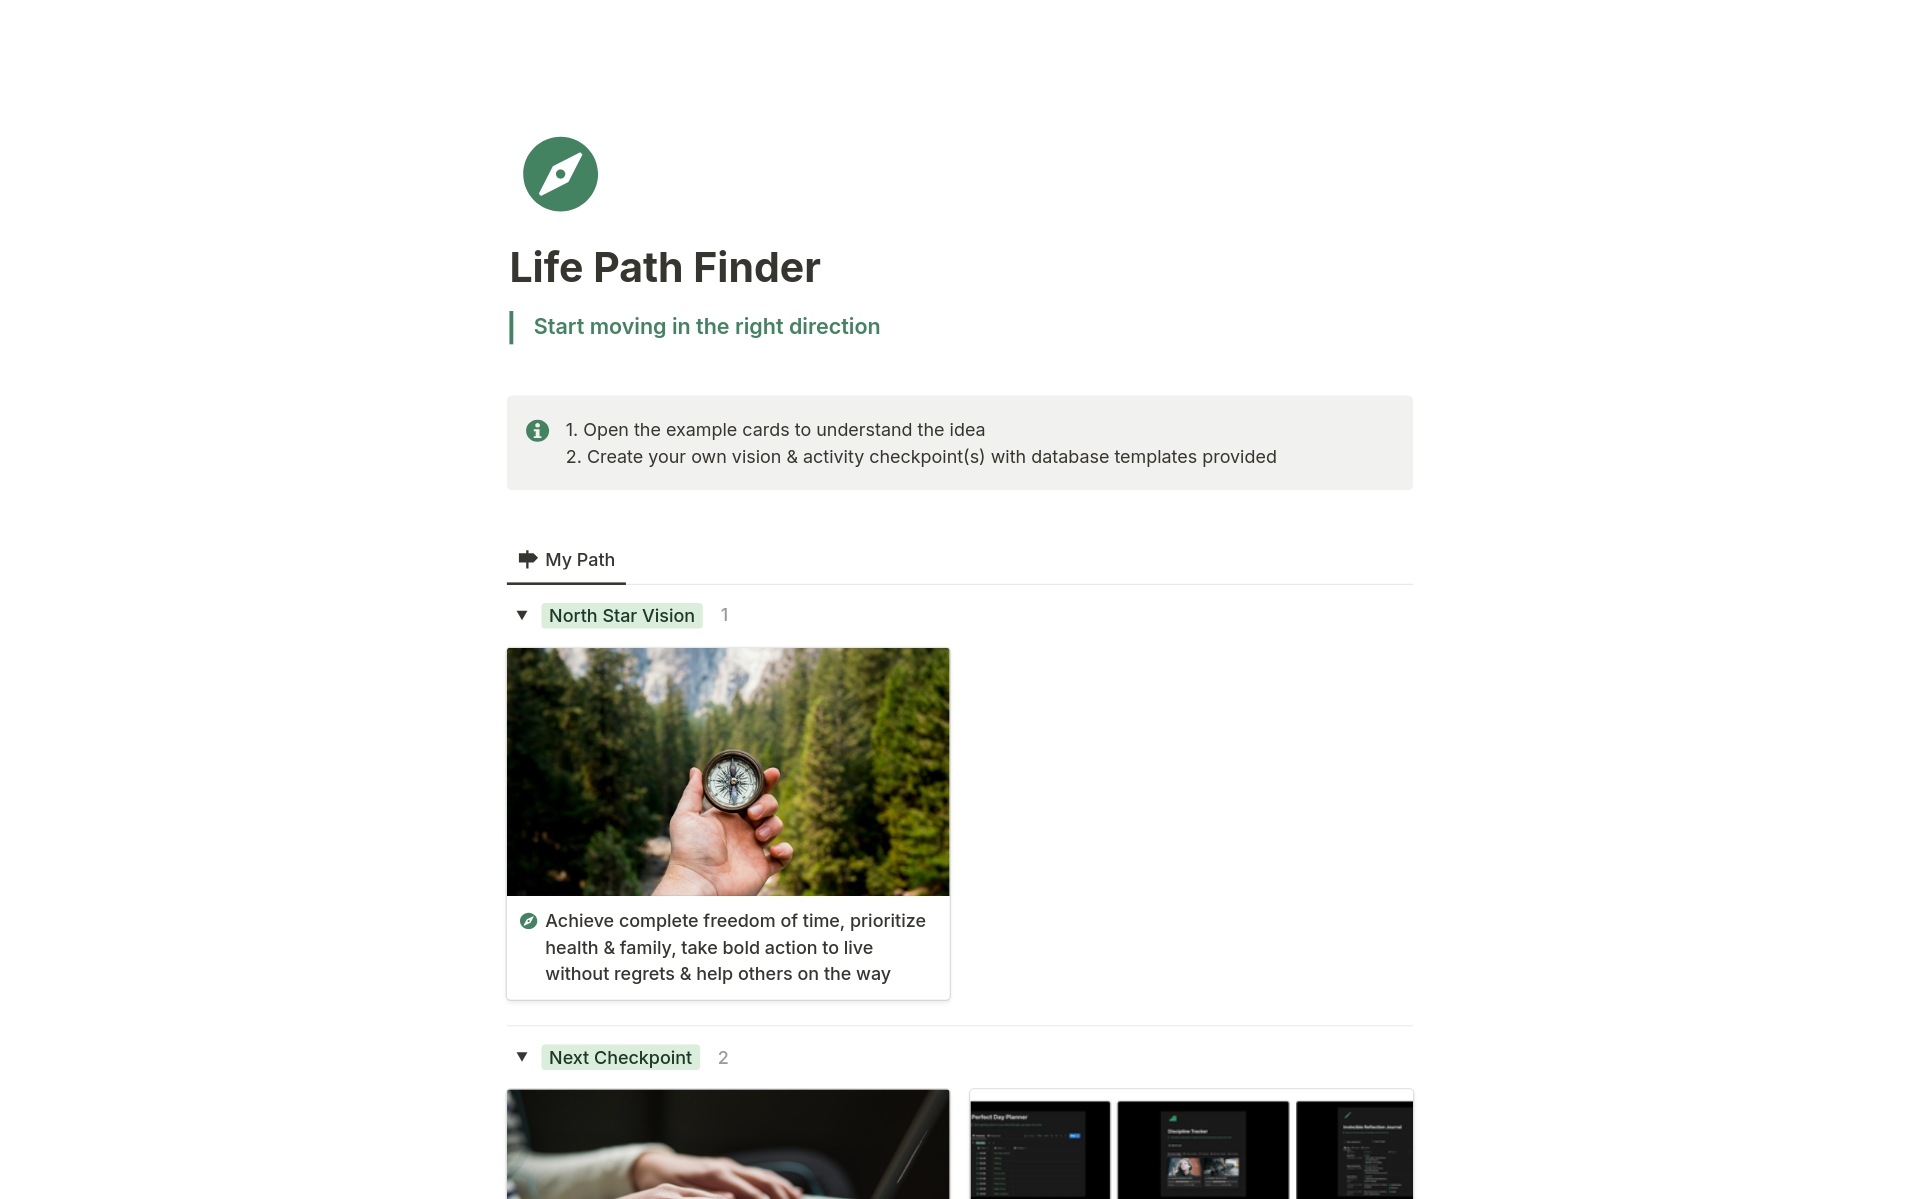 Craft your personal vision statement and plan your next activity checkpoint with Life Path Finder. Use your life values and guiding questions as help.